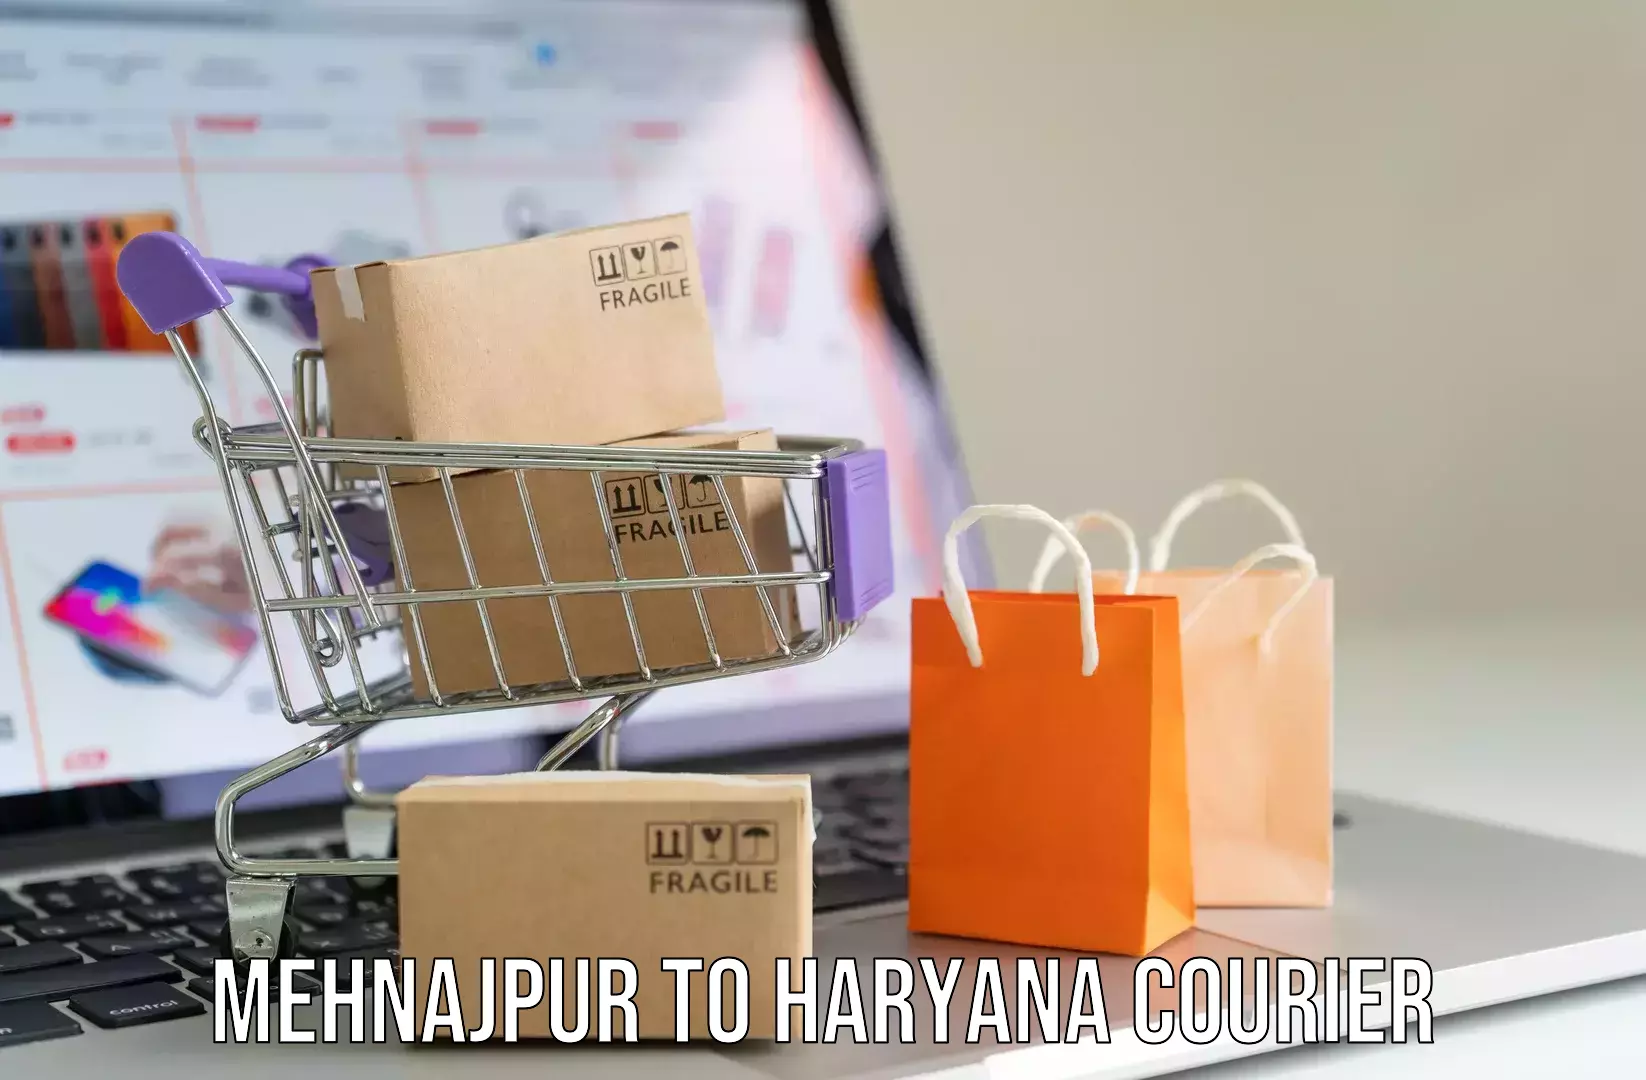 Express luggage delivery Mehnajpur to Bilaspur Haryana